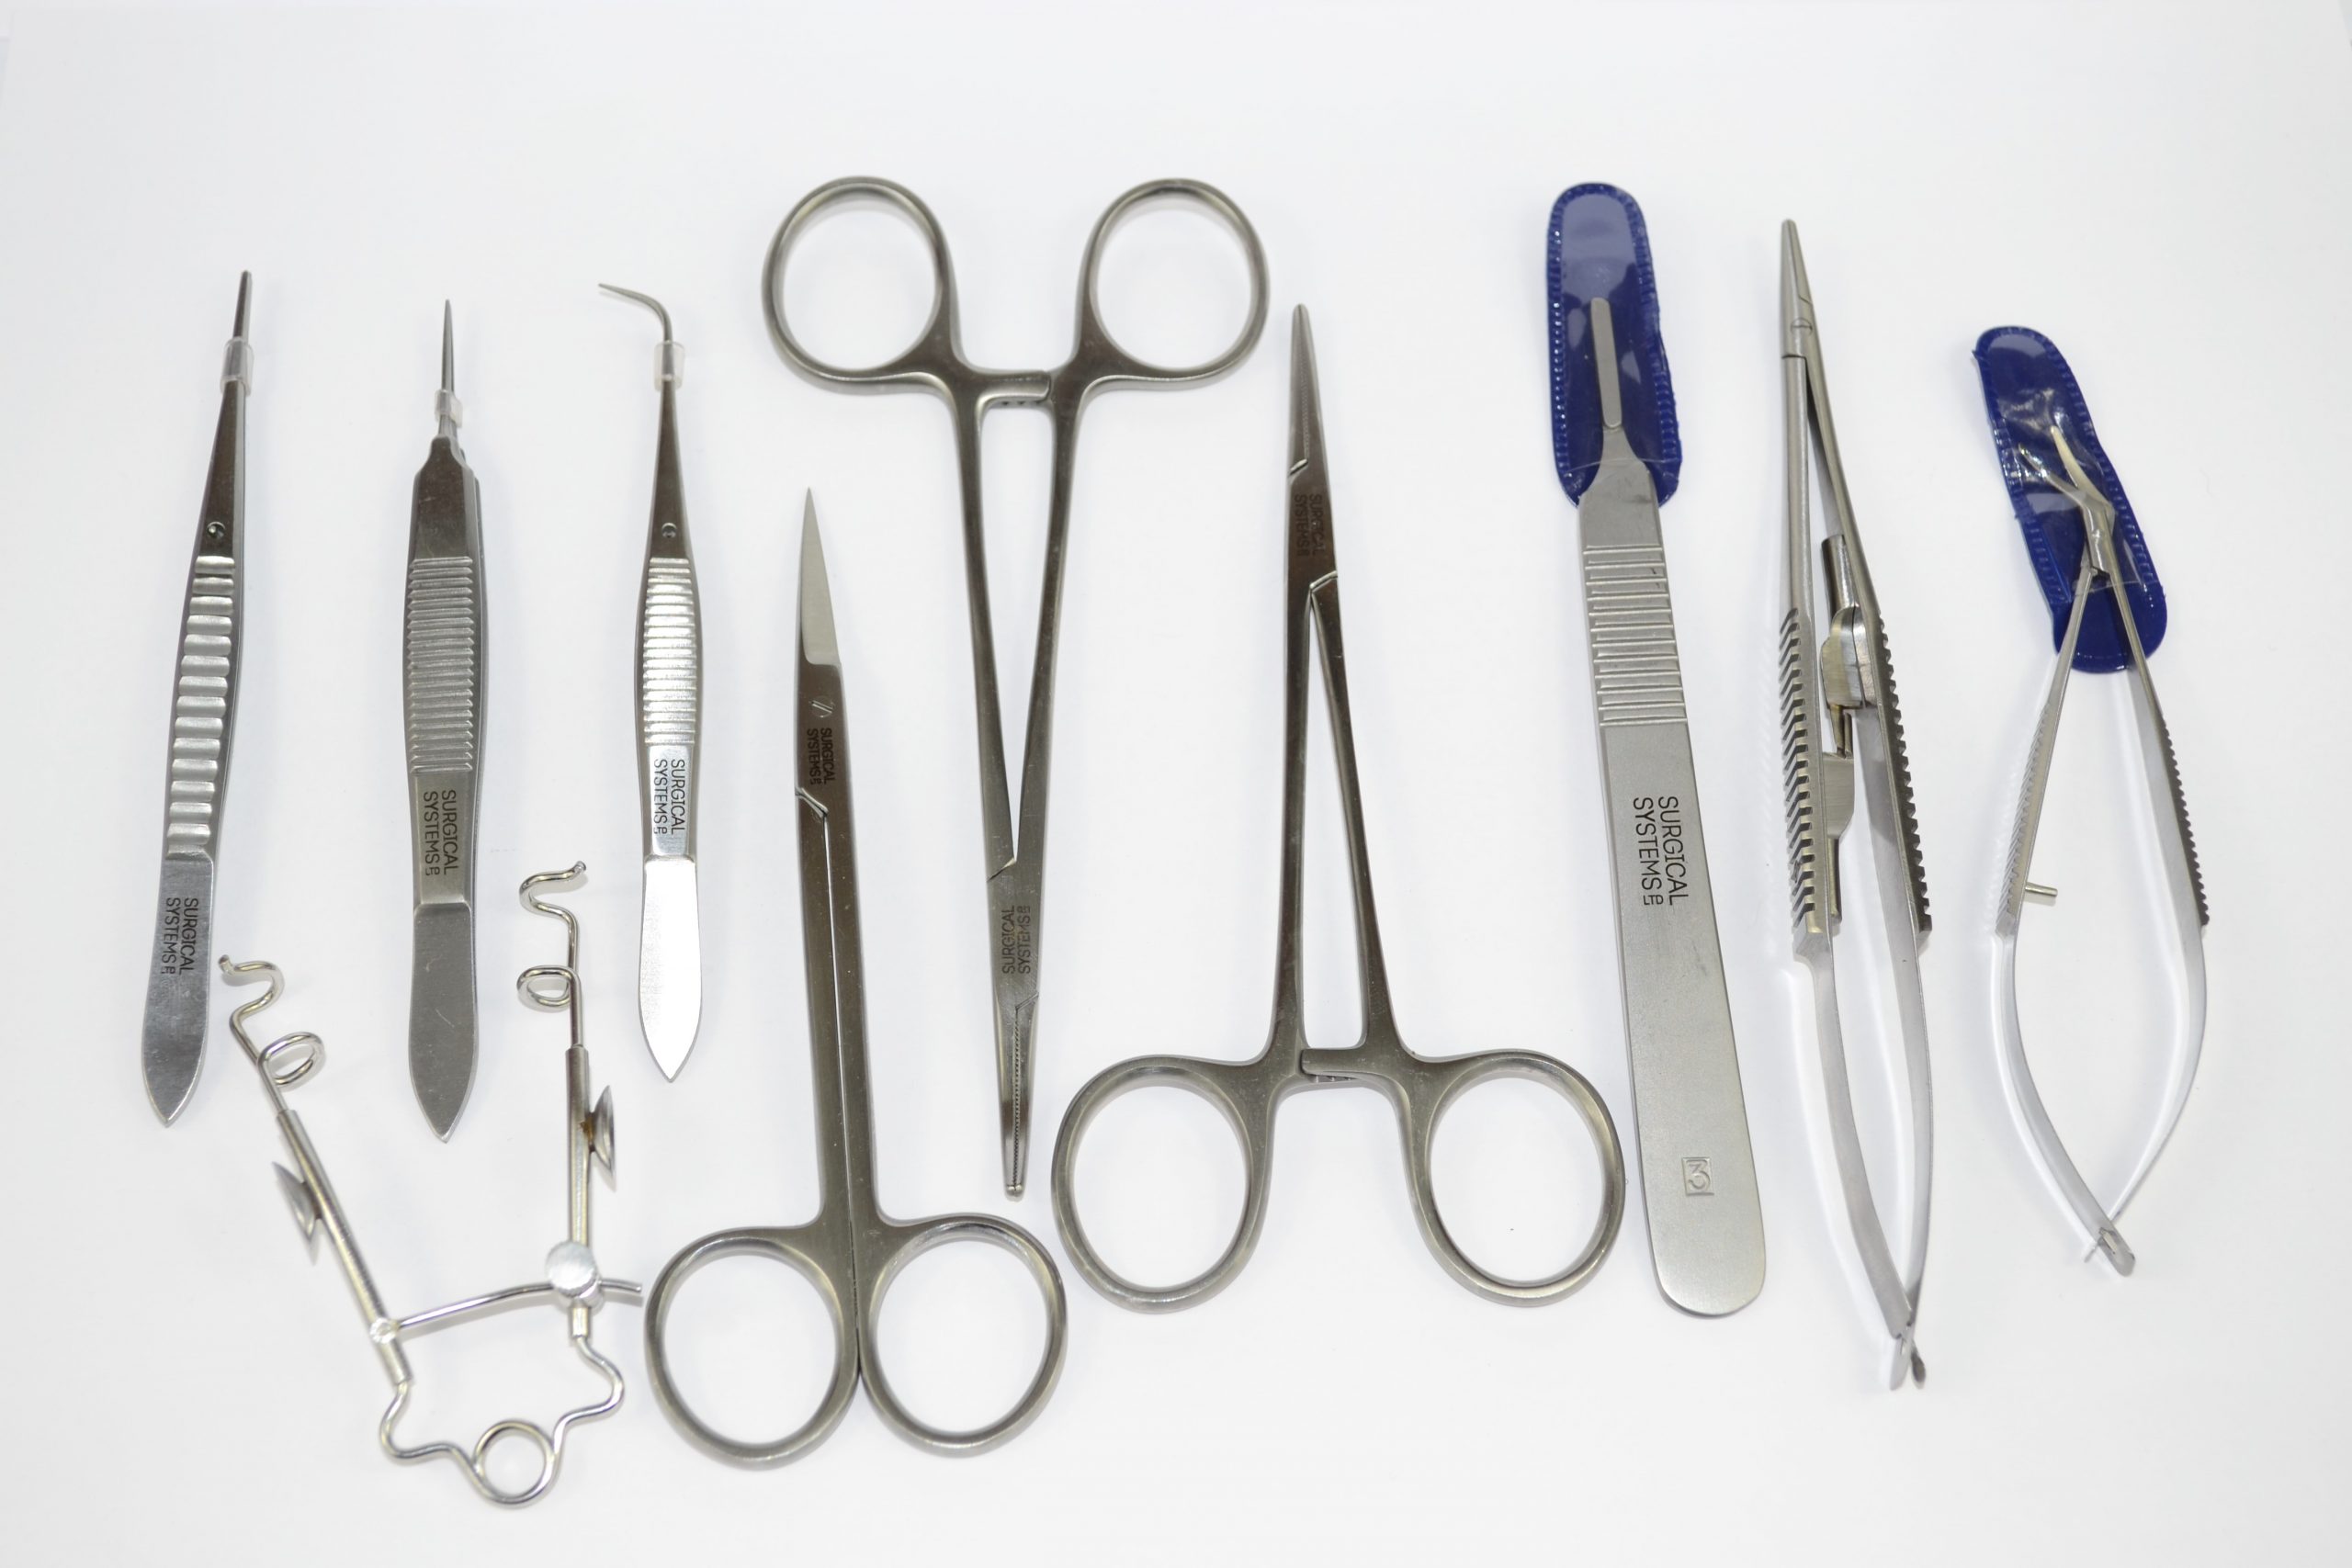 Global Veterinary Surgical Instruments Market Industry Analysis and Forecast (2017-2024)